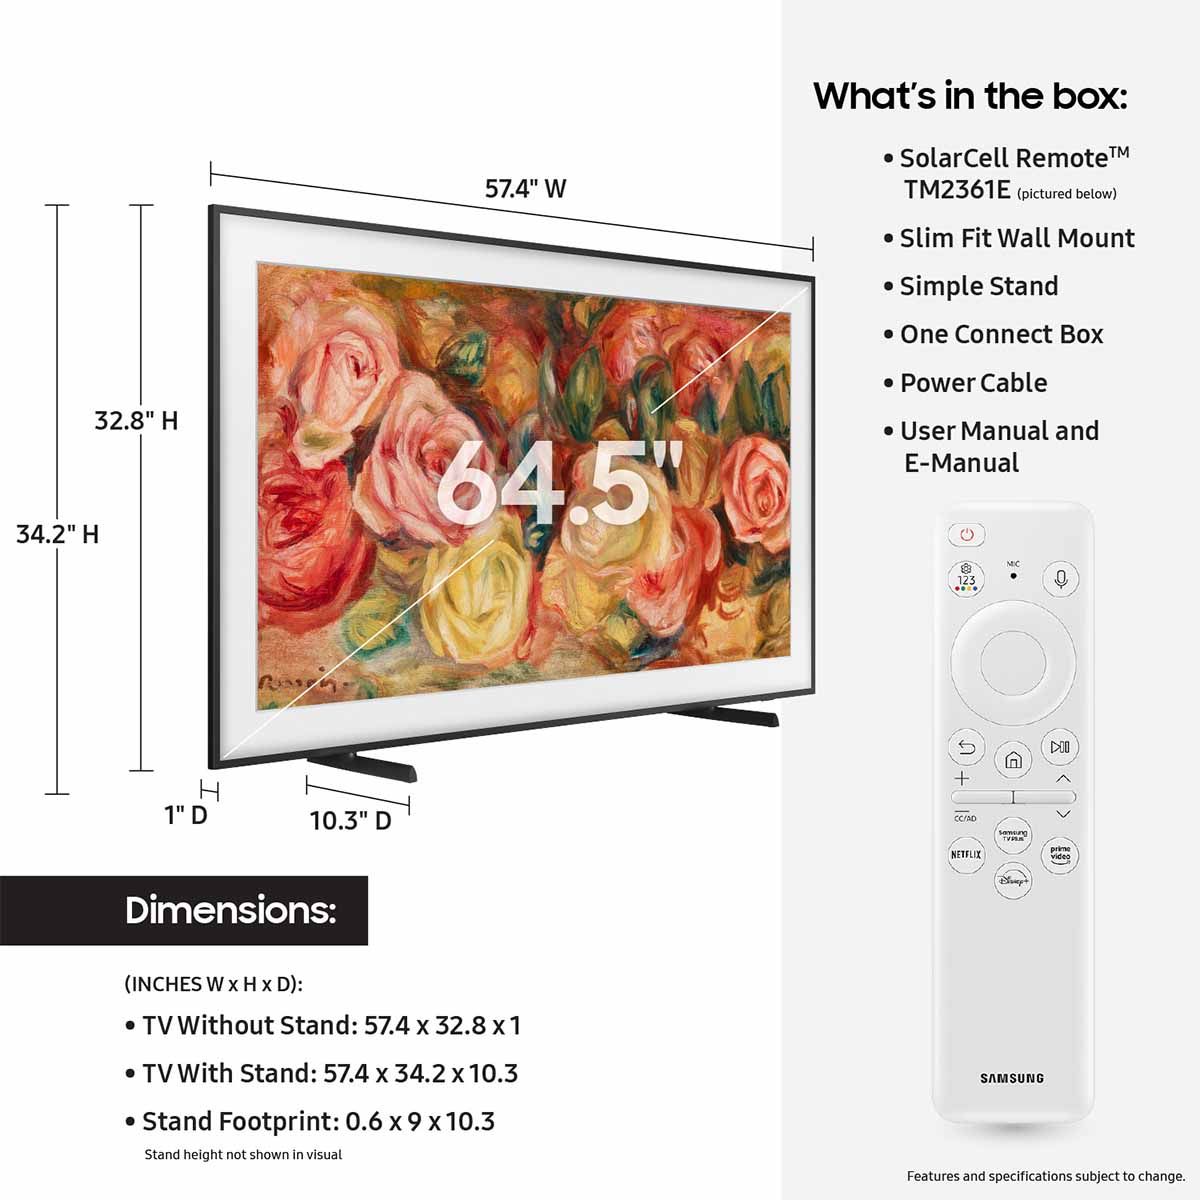 Samsung LS03D The Frame QLED HDR Smart TV - 65" with stand - dimensions and what's in the box